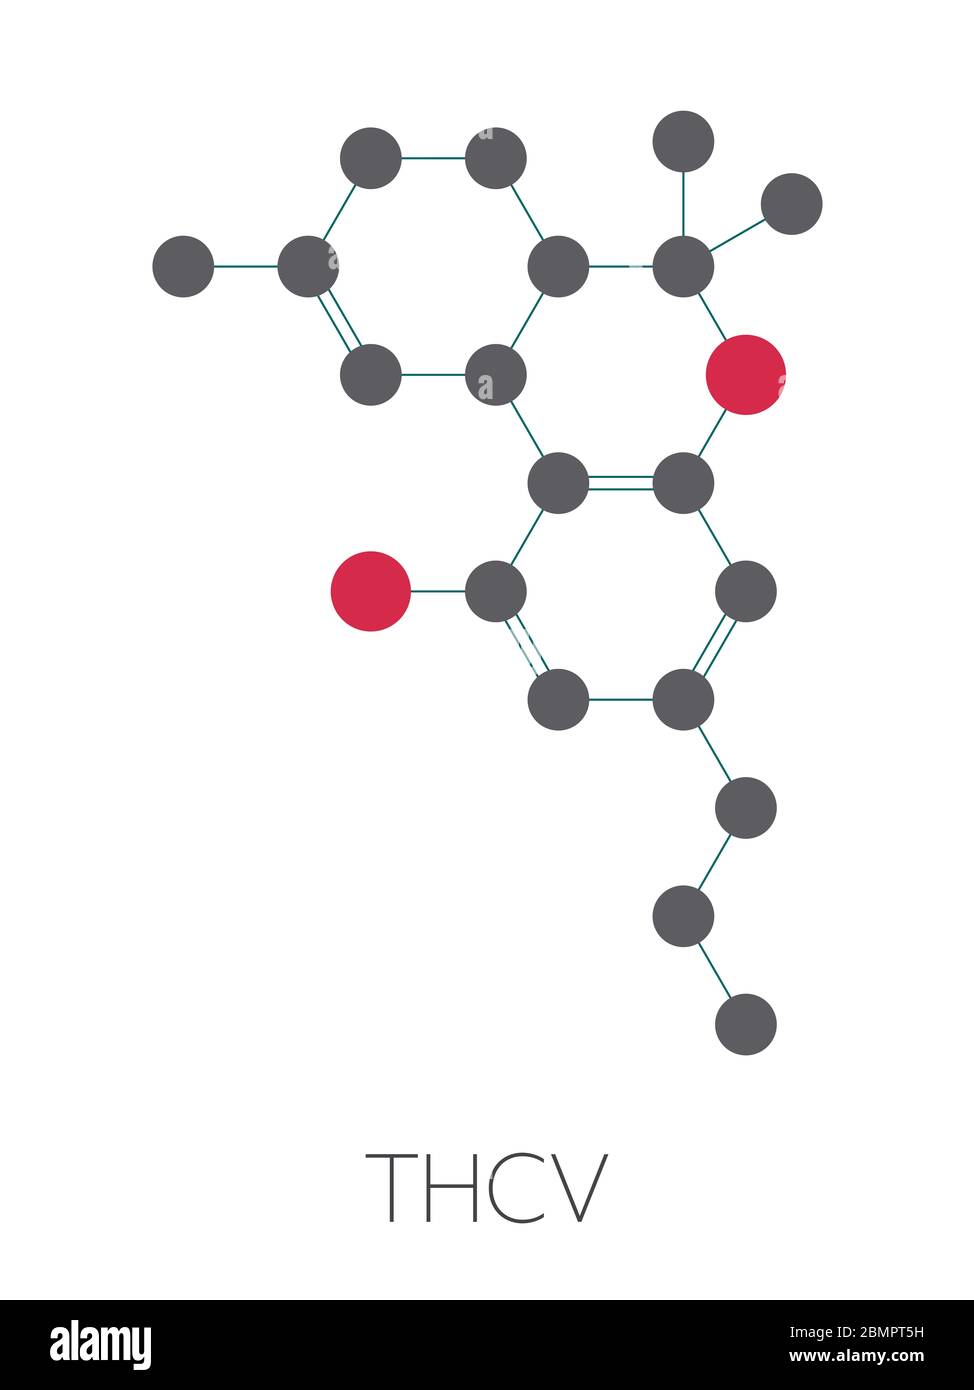 Tetrahydrocannabivarin or THCV cannabinoid molecule. Stylized skeletal formula (chemical structure): Atoms are shown as color-coded circles: hydrogen (hidden), carbon (grey), oxygen (red). Stock Photo